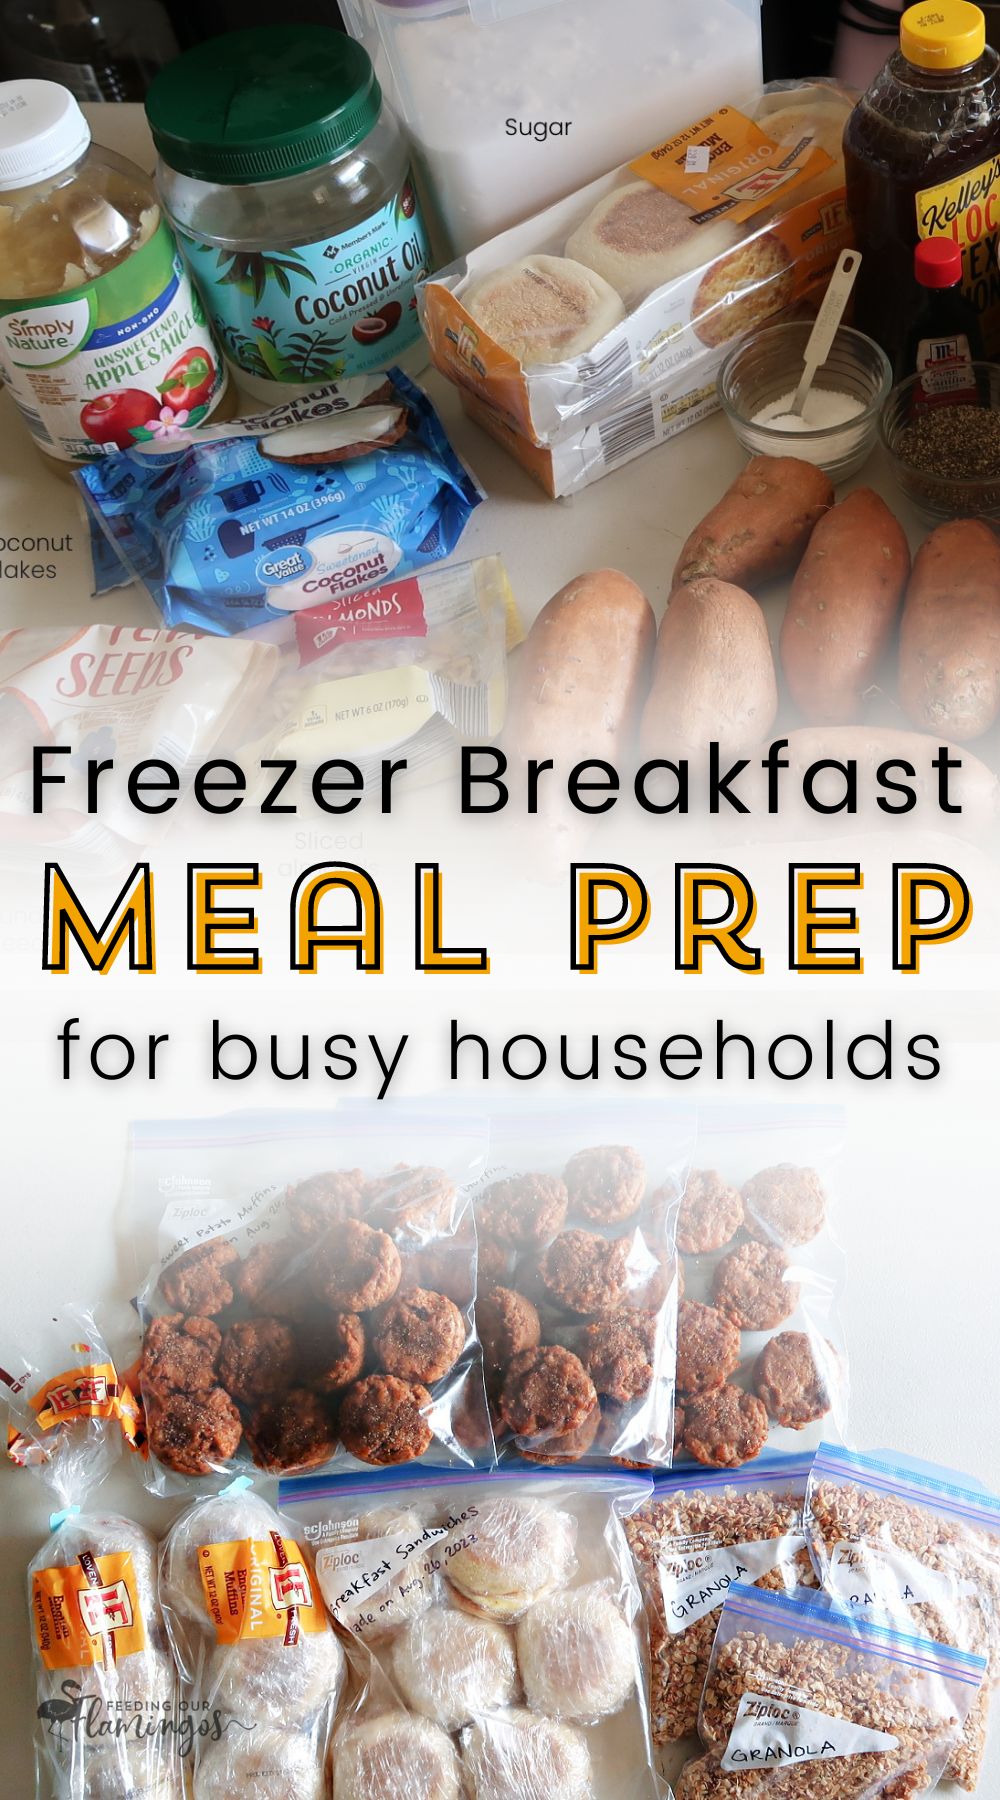 Freezer breakfast meal prep is a sanity-saver in my house. Waking up never felt so good! If you struggle to get a healthier, warm breakfast on the table for your family, try this method of making breakfast for a few months and see if things improve!